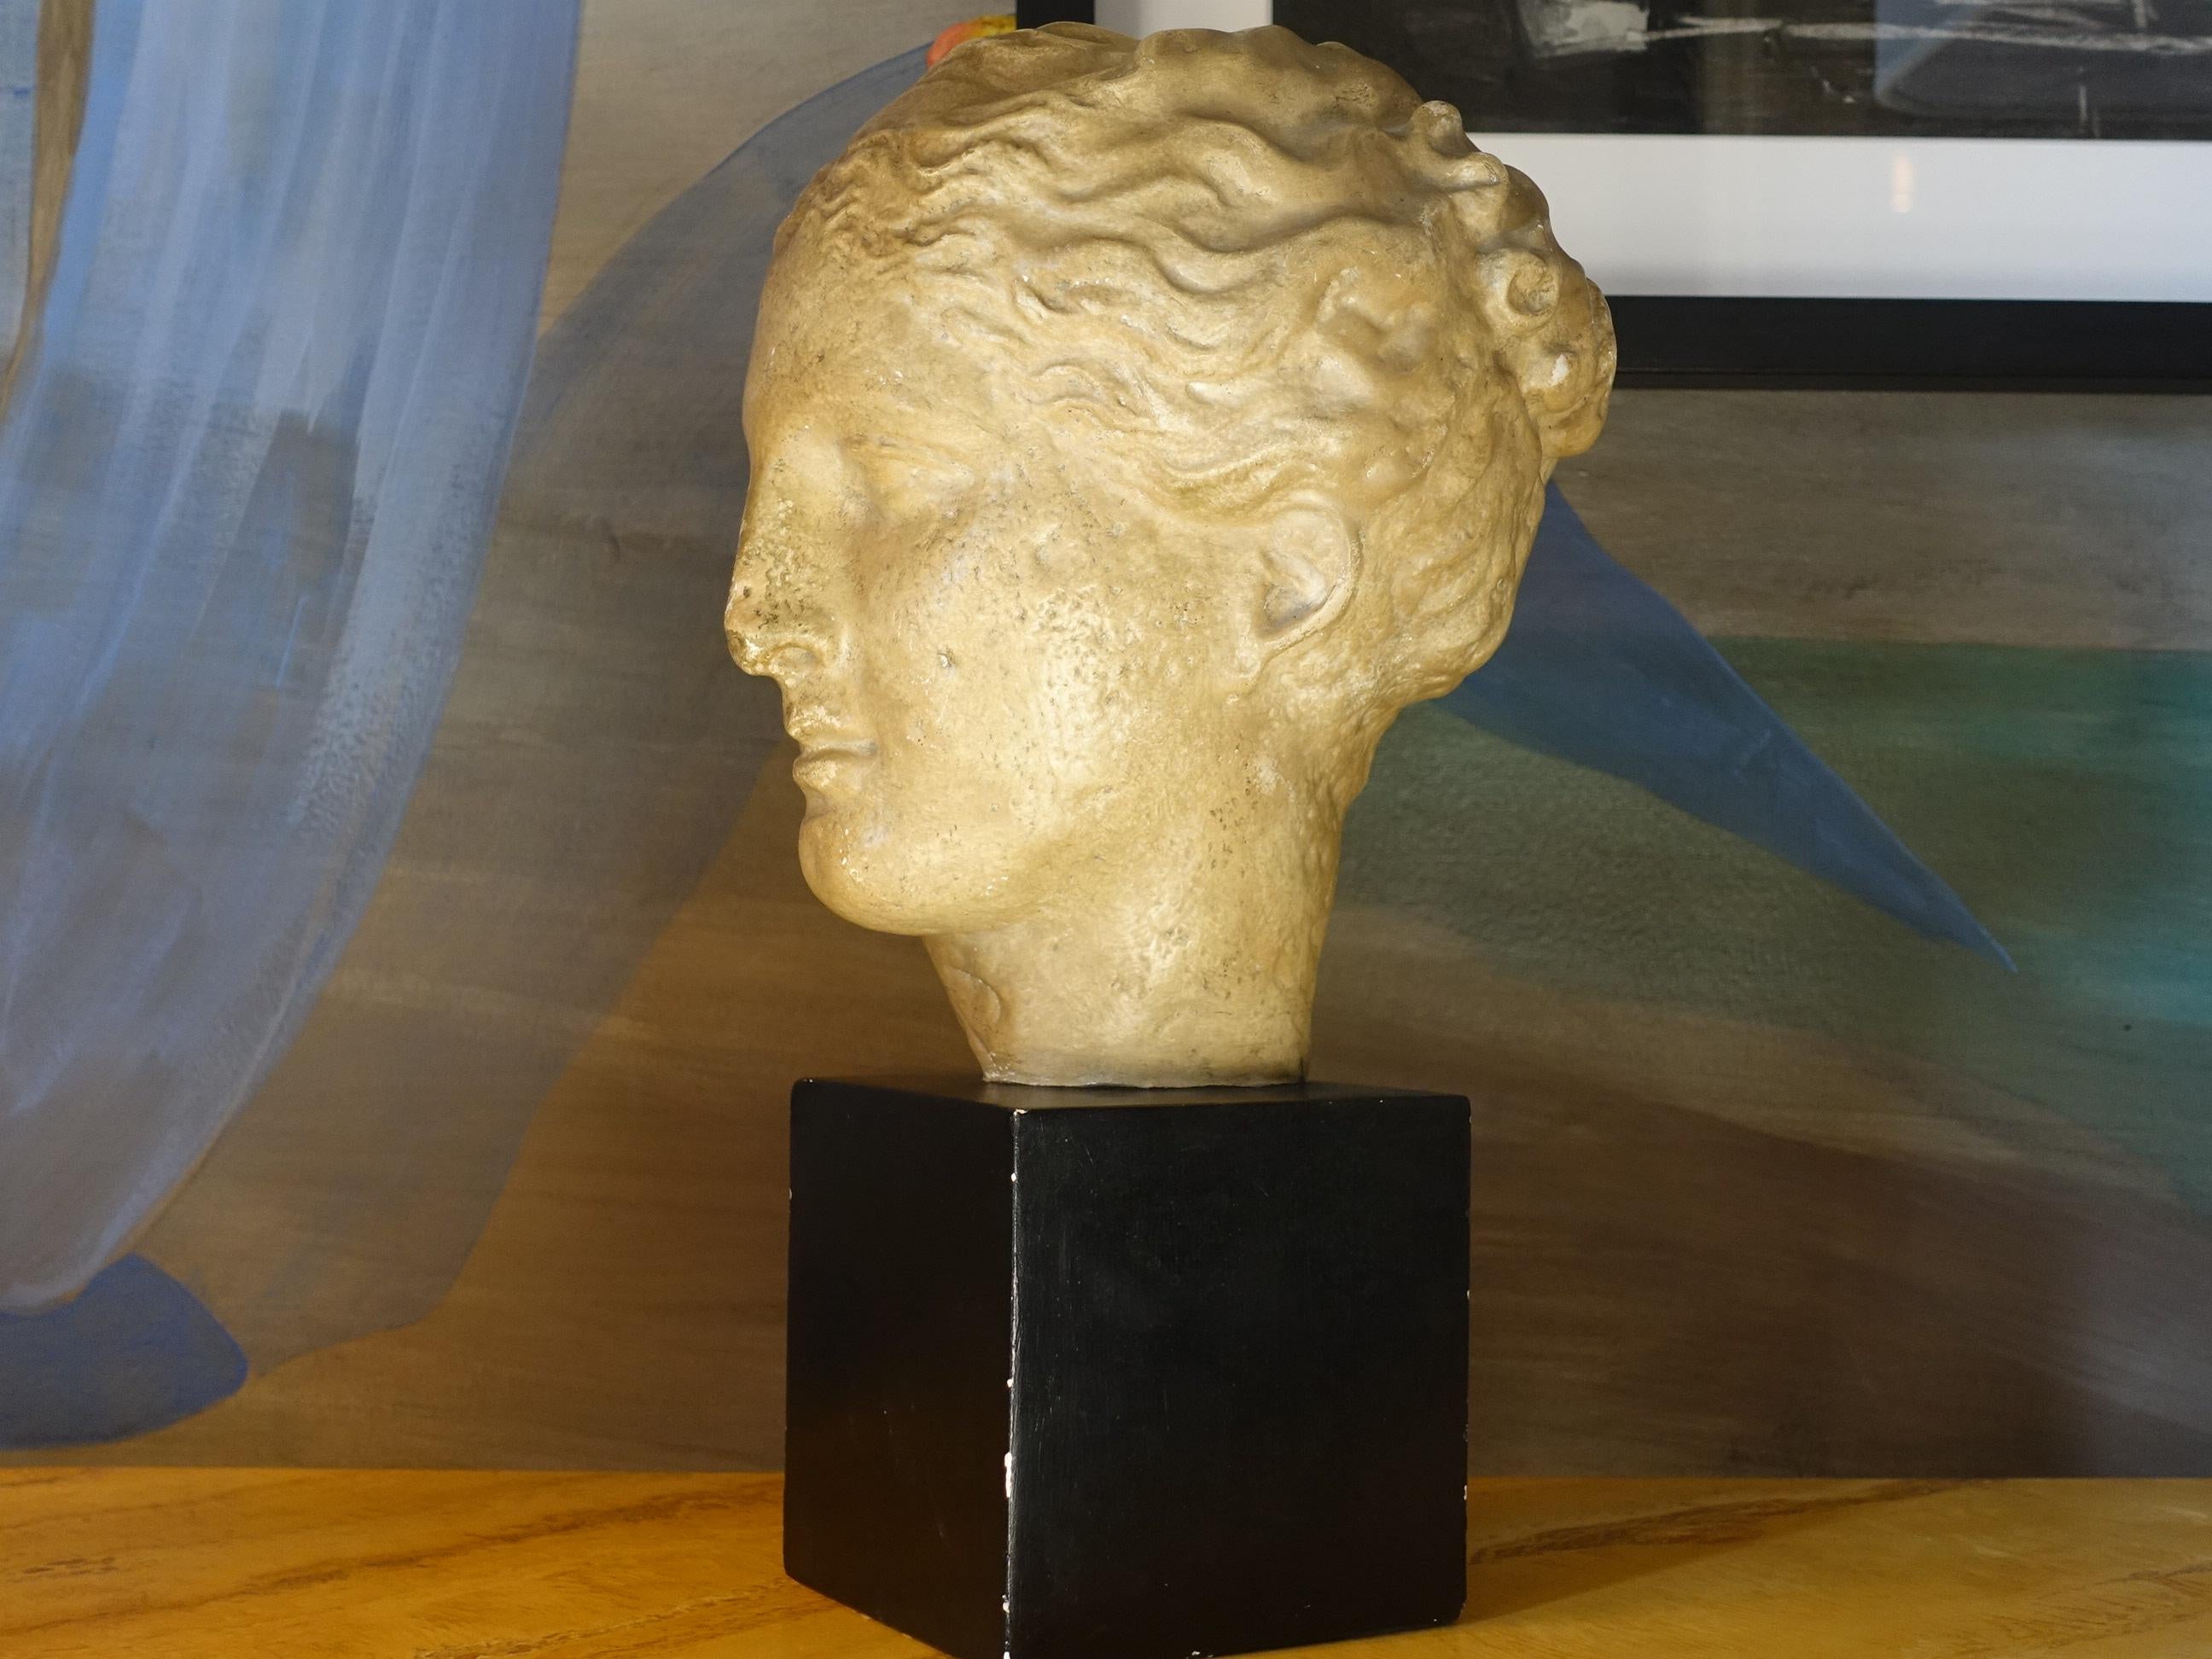 Late 19th century Italian female gypsum head sculpture, black base, perfect condition and vintage patina, just few chipped on the base, there is a coin inside the base with illegible signature.